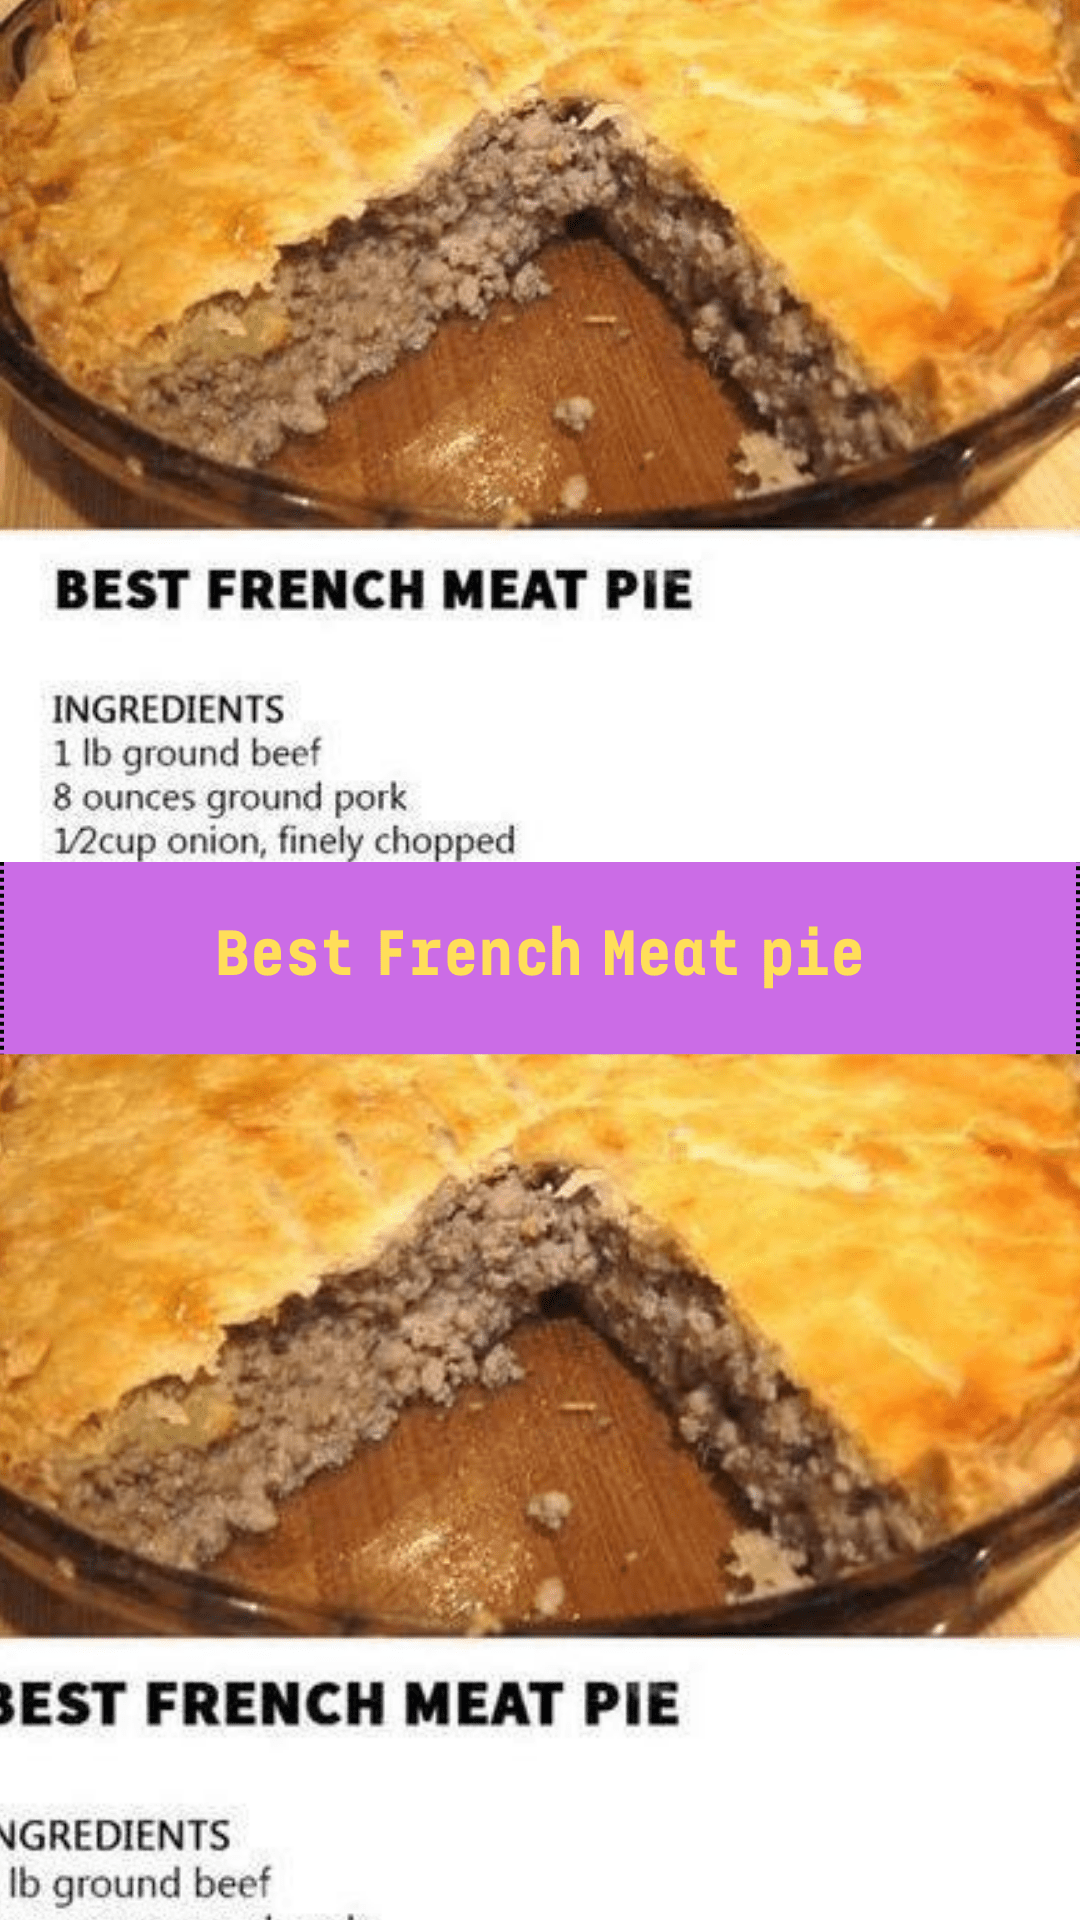 Best French Meat pie - middleeastsector